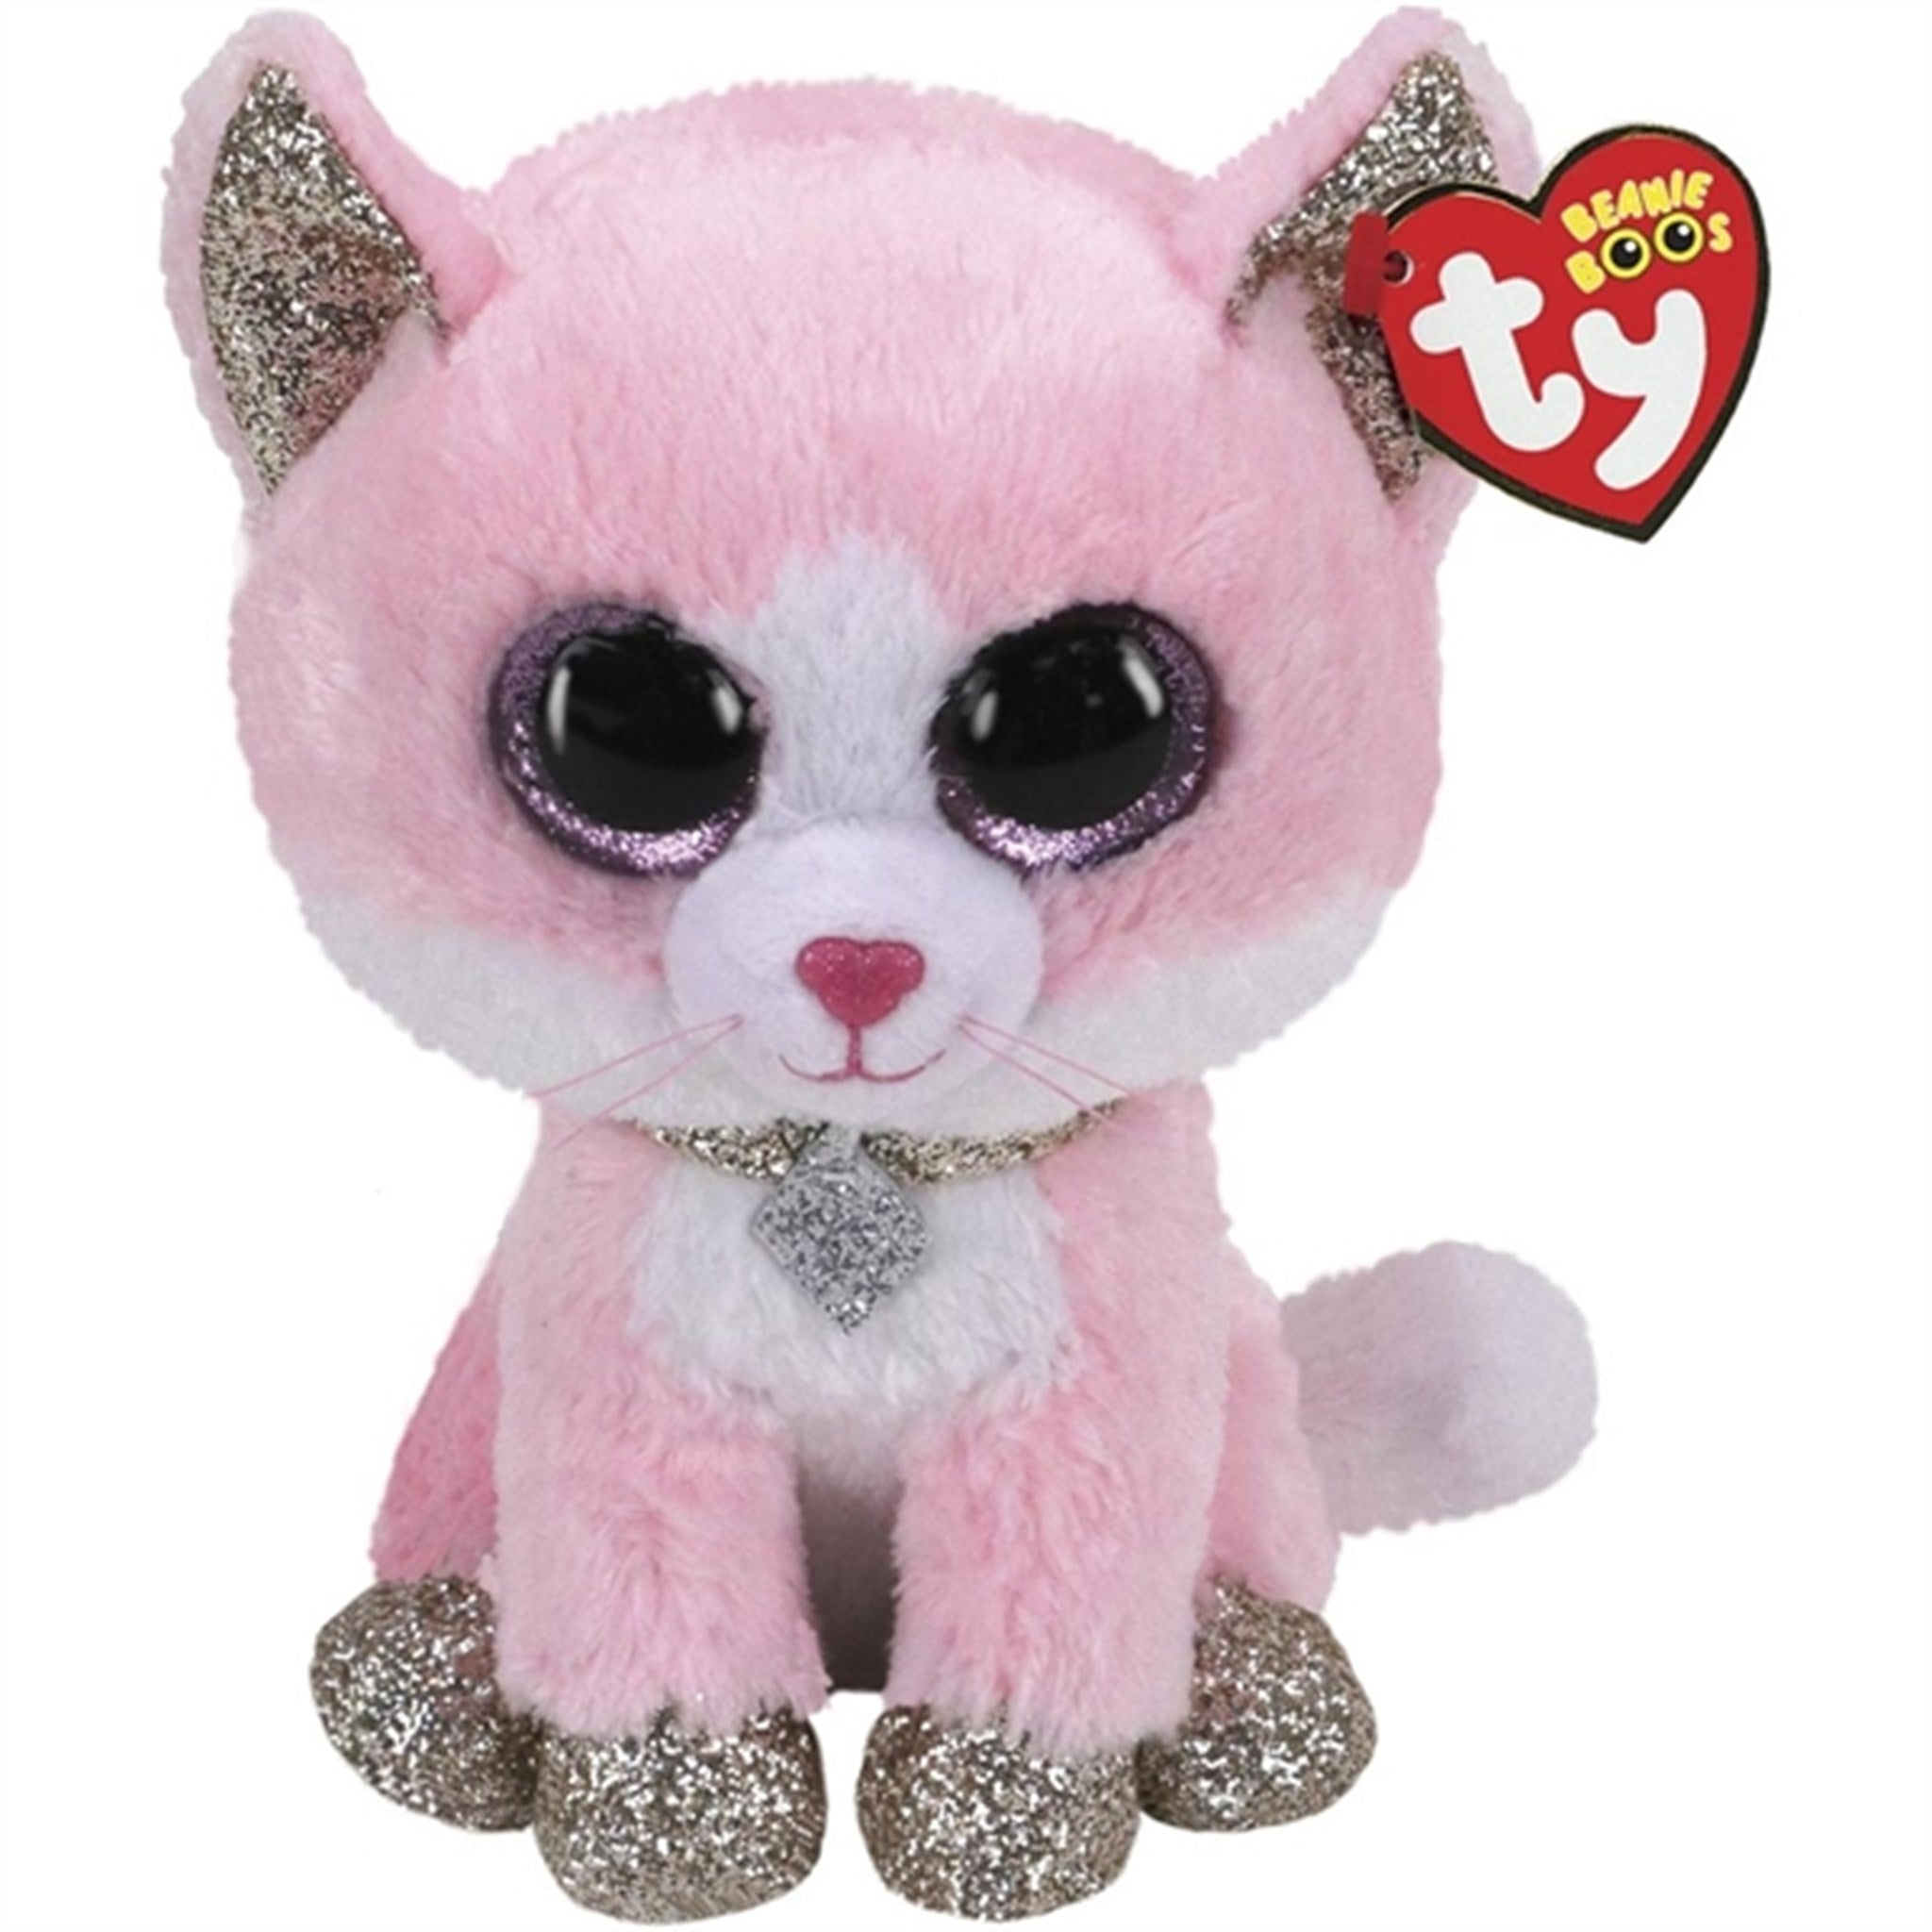 TY Beanie Boos Fiona - Pink Cat Med